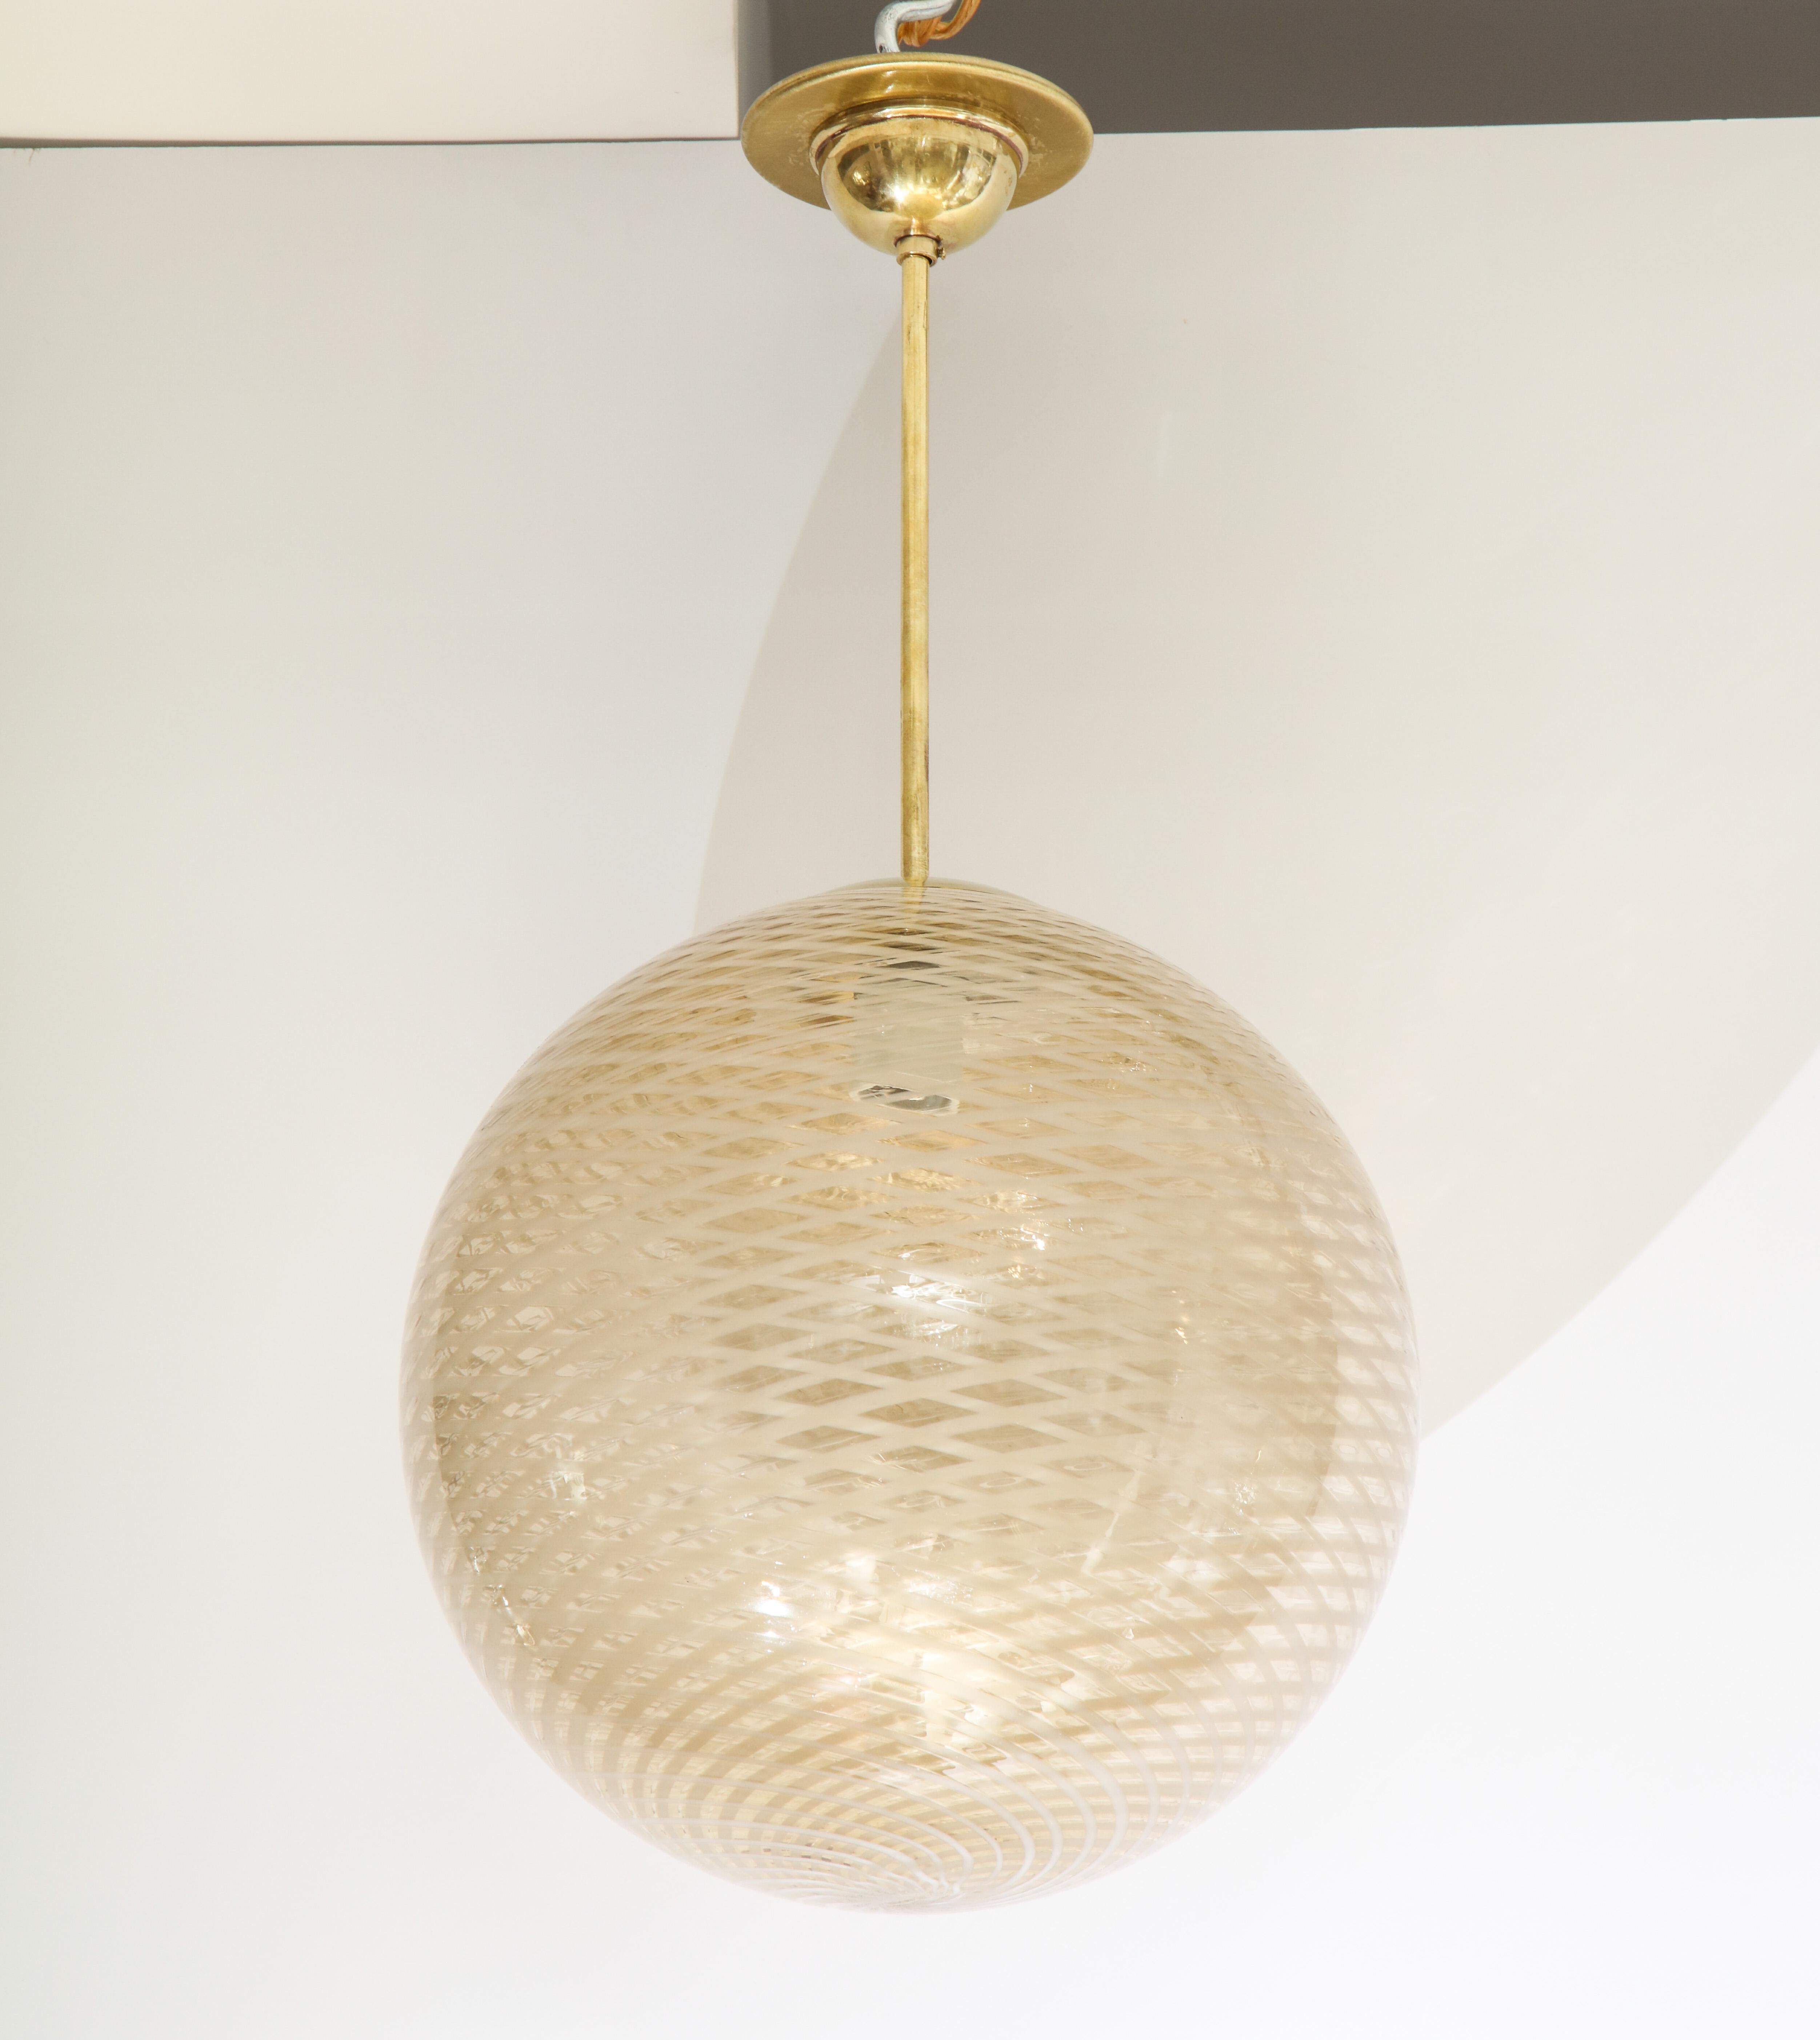 Venini early and rare 1930s stunning reticello glass globe chandelier in a beautiful and warm gold, cream and white hand blown glass; iconic swirl design with brass columnar support and canopy. All original. (Re-wired for USA standards). Attributed